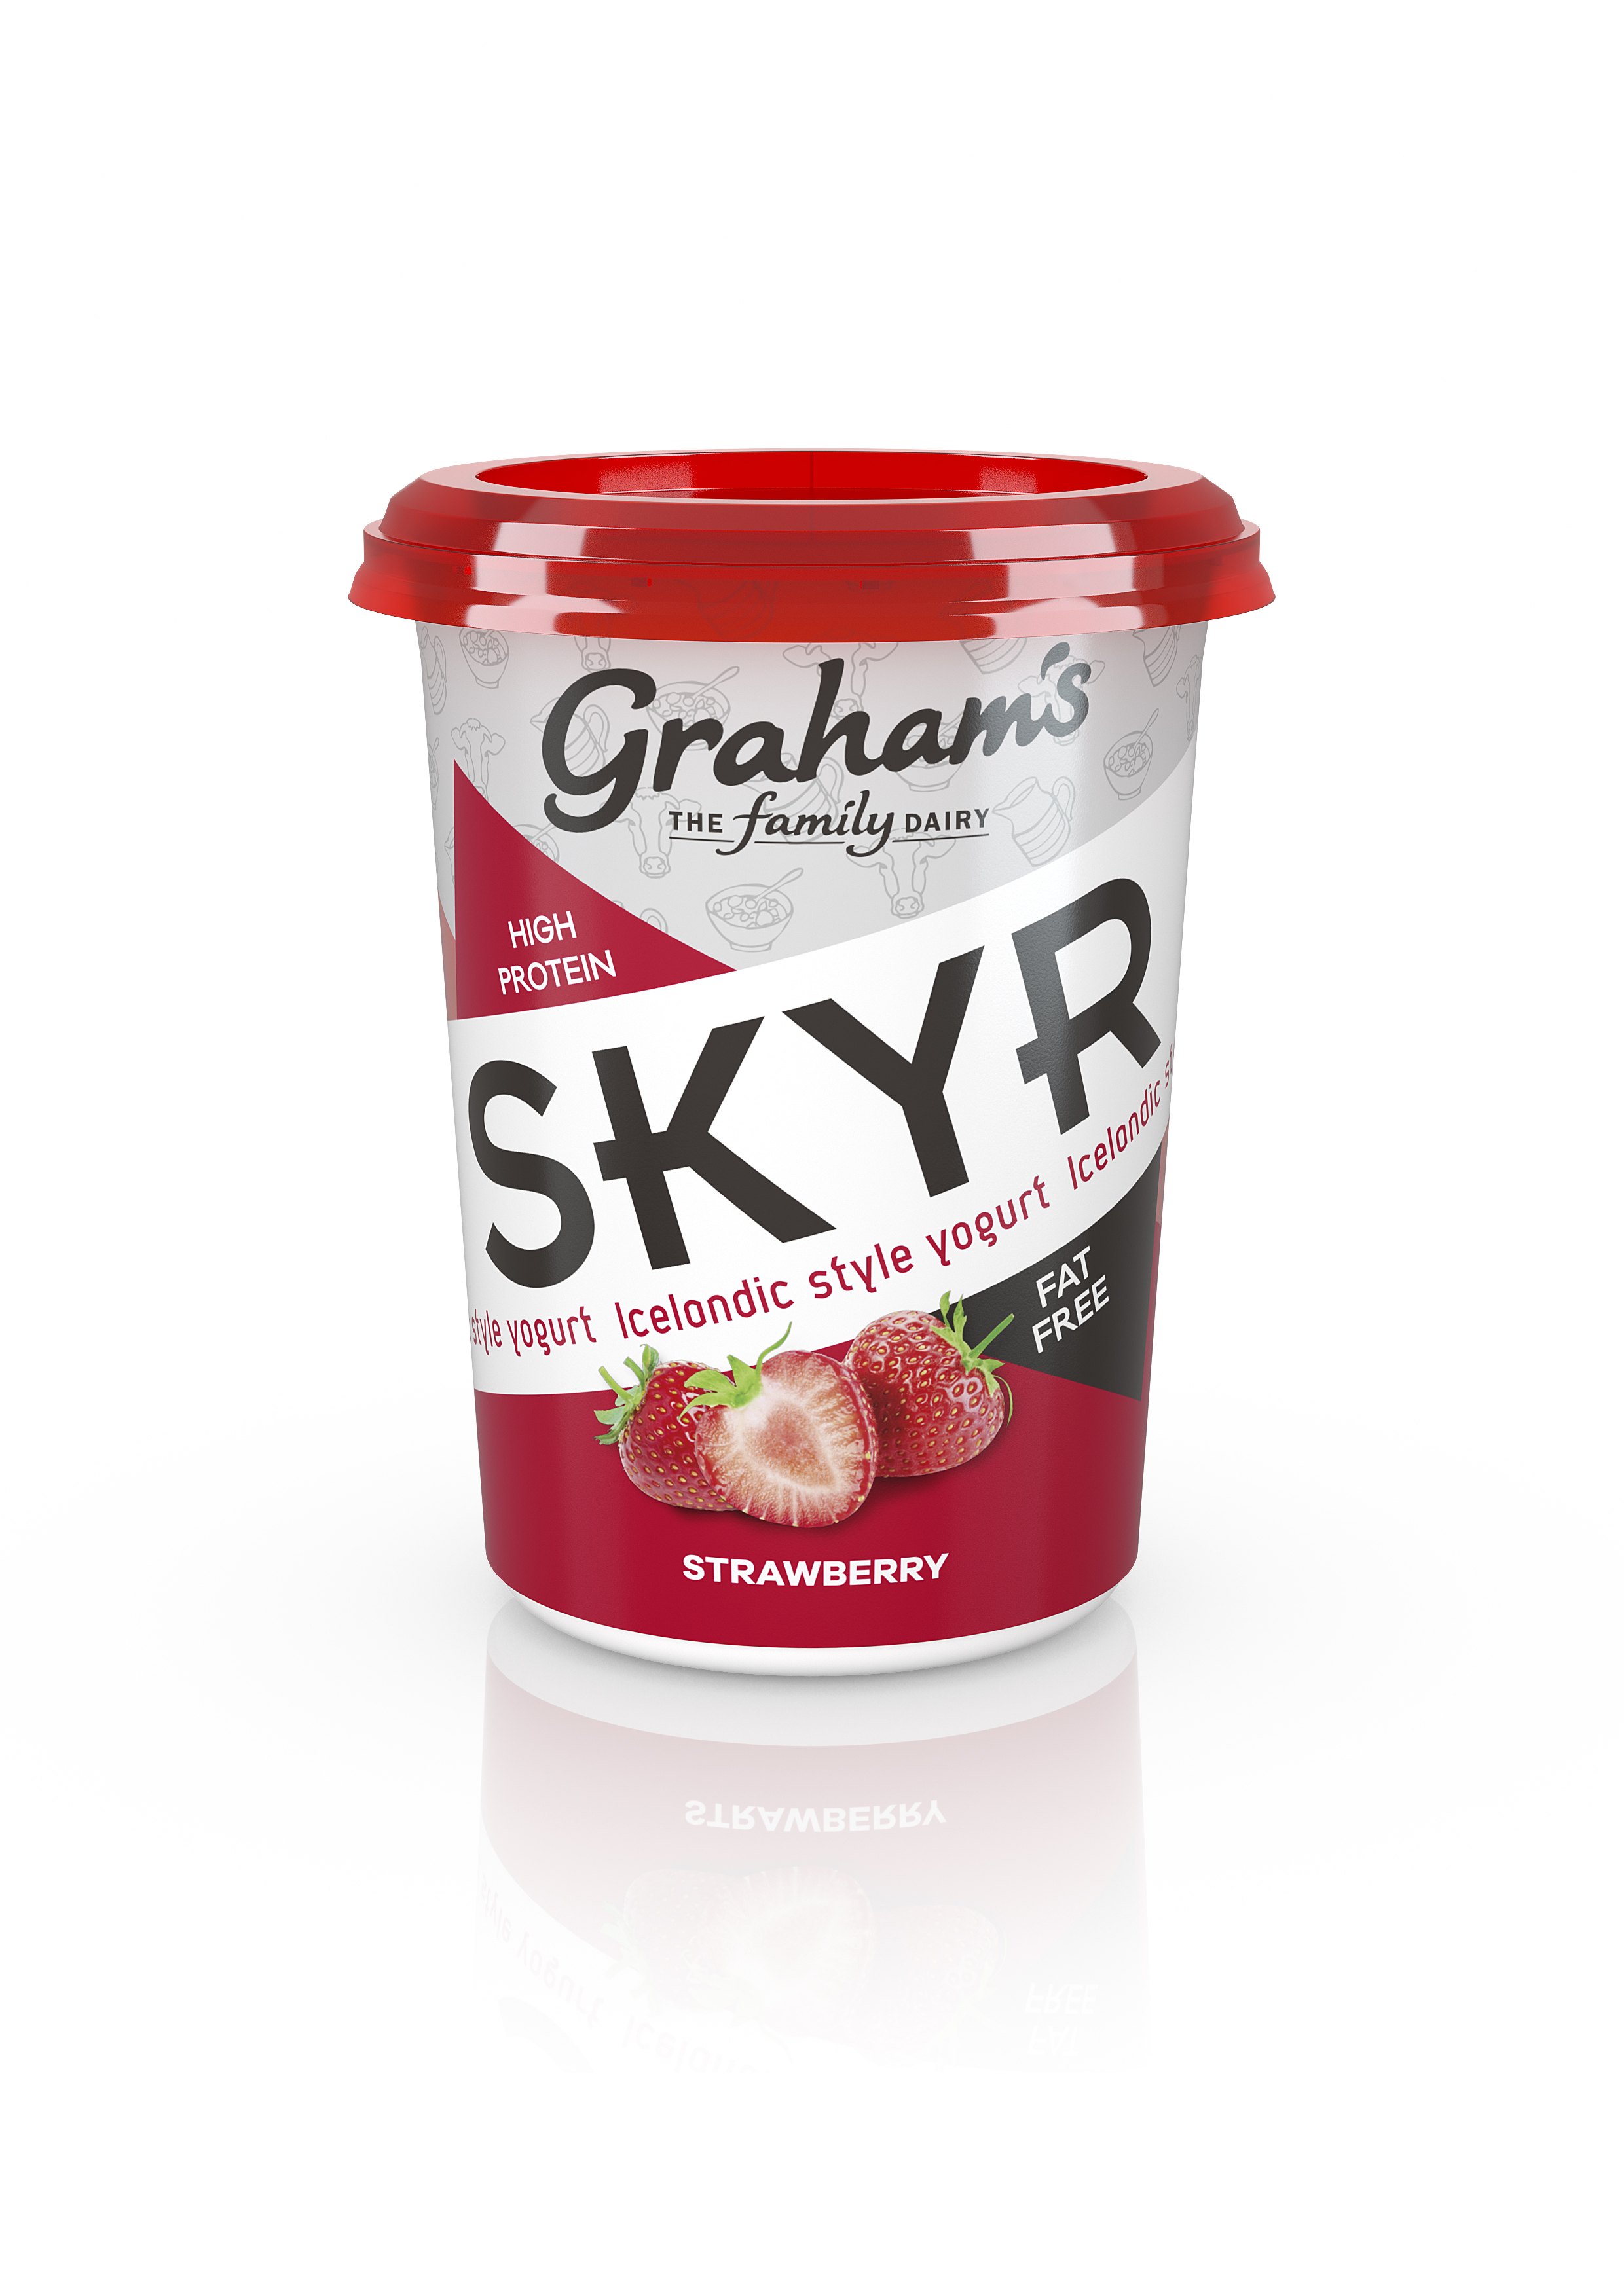 Scotland’s Family Dairy Launch for New Skyr Product